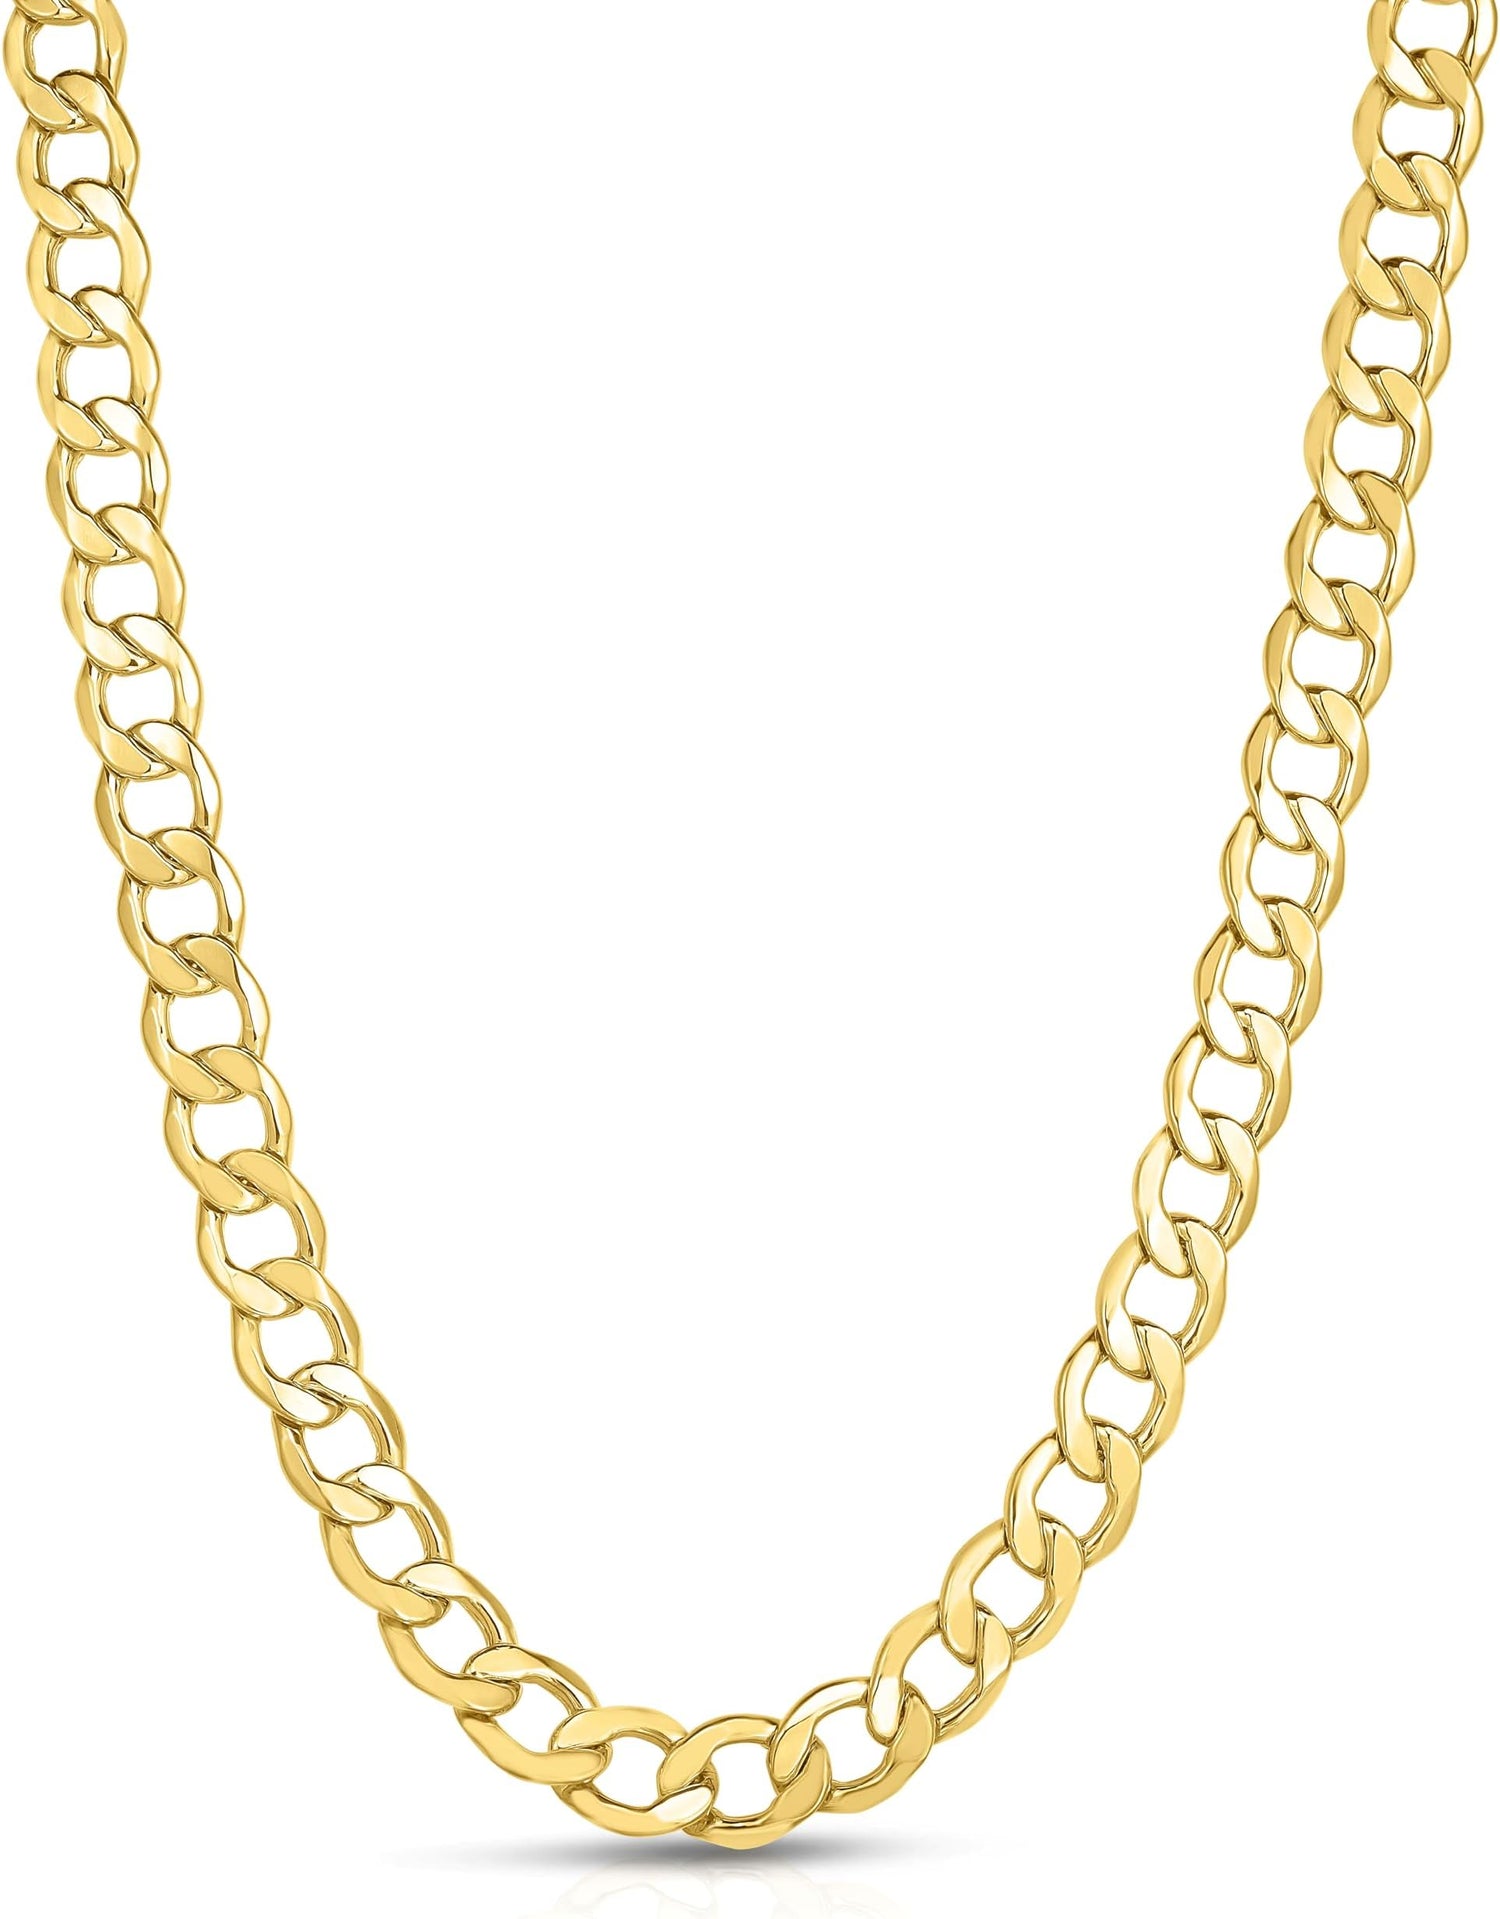 10k Yellow Gold 9mm Hollow Cuban Curb Link Chain Necklace